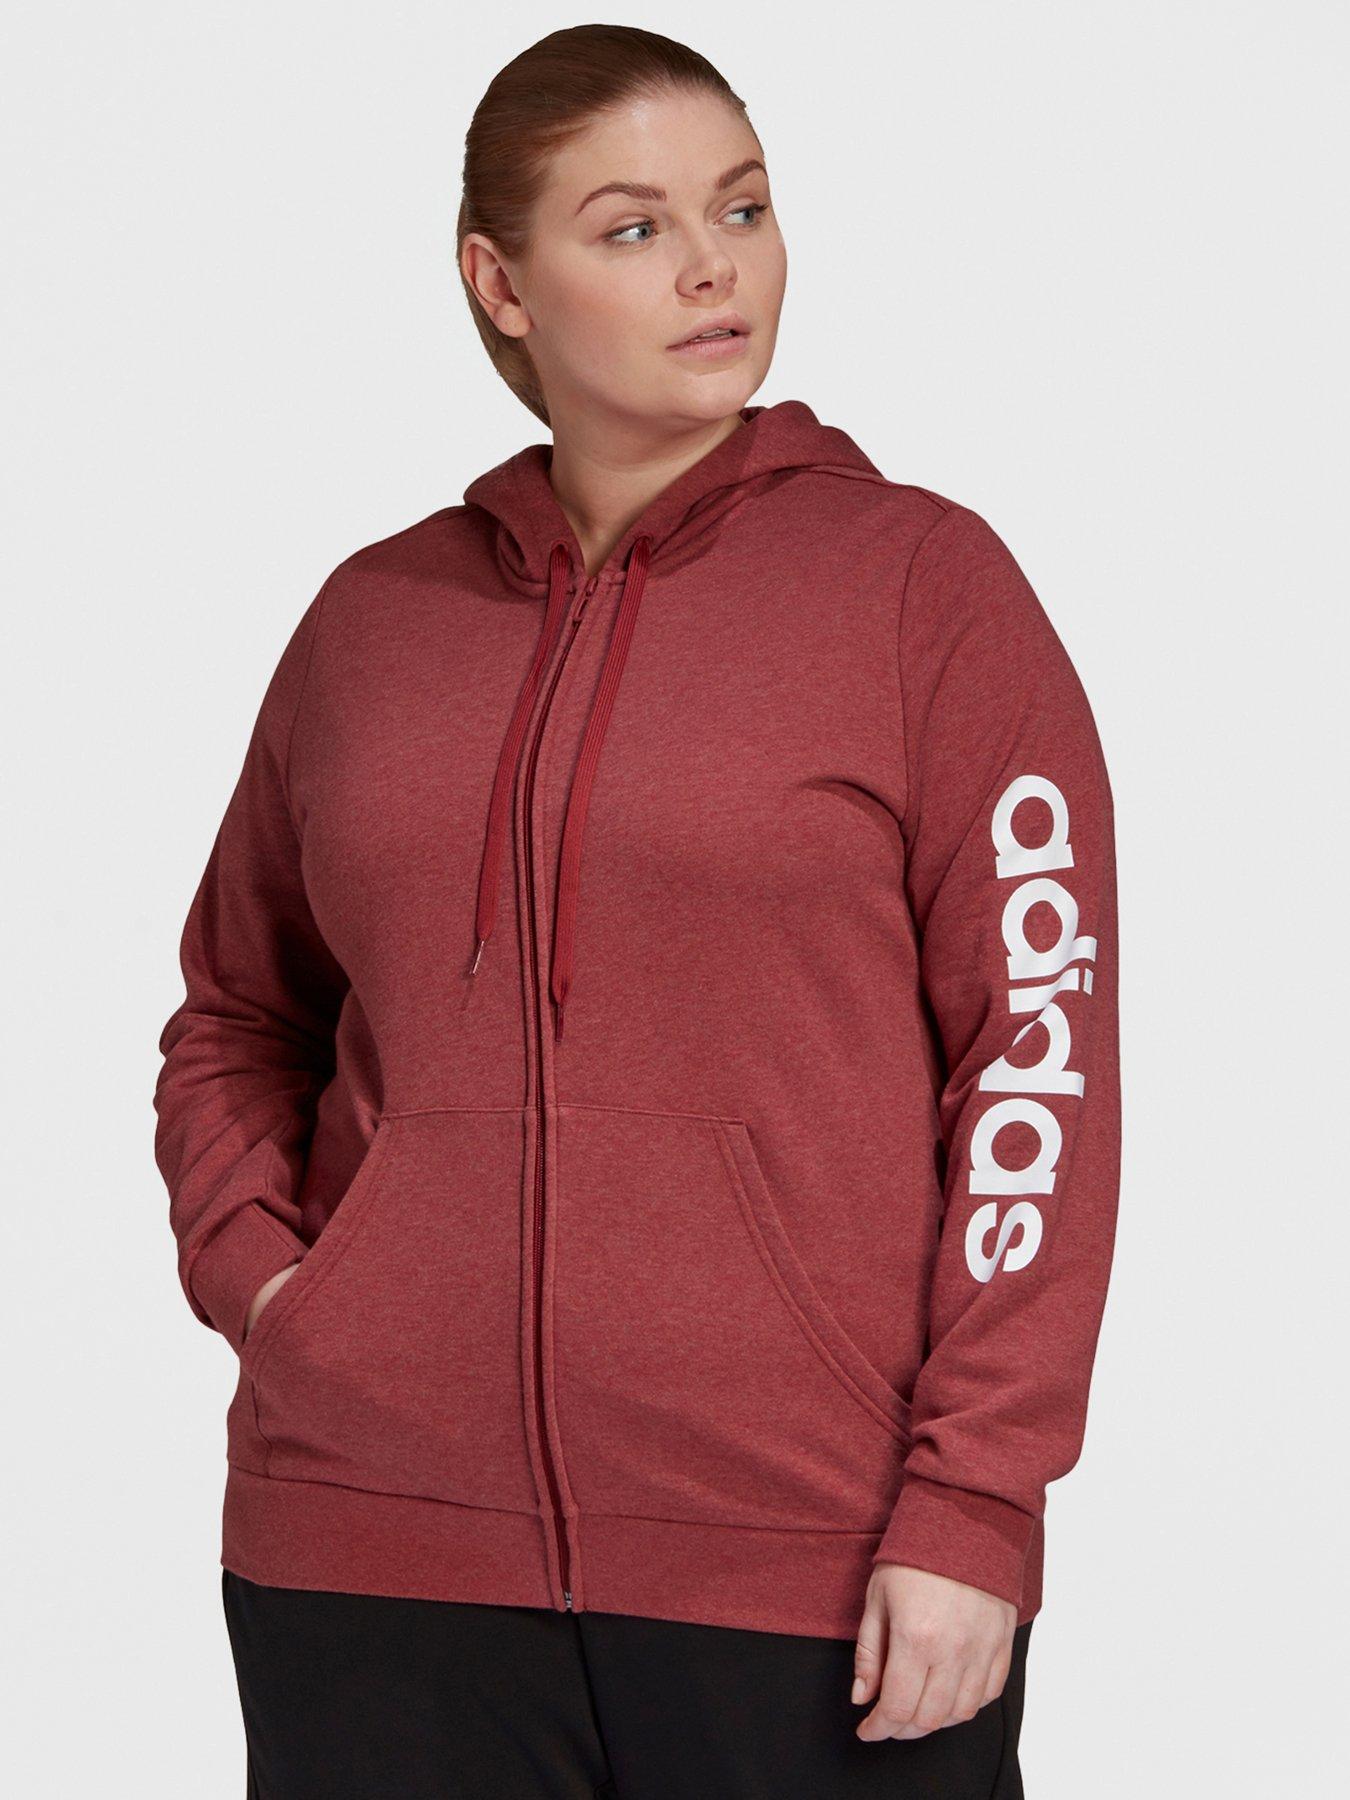 adidas tracksuit tops